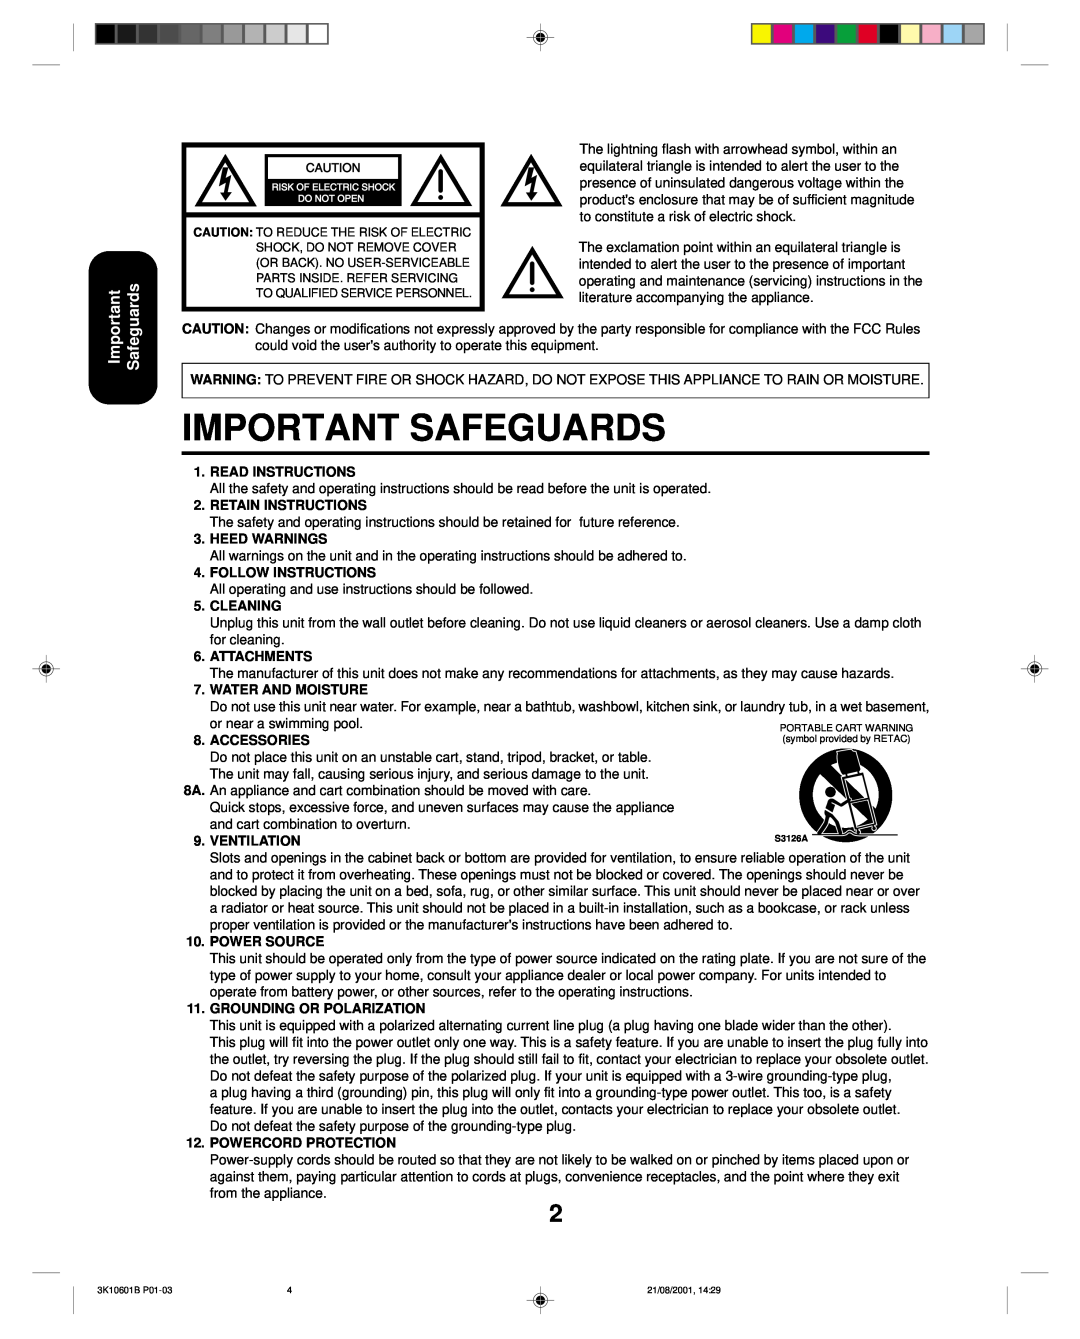 Toshiba 27A41 Important Safeguards, Read Instructions, Retain Instructions, Heed Warnings, Follow Instructions, Cleaning 